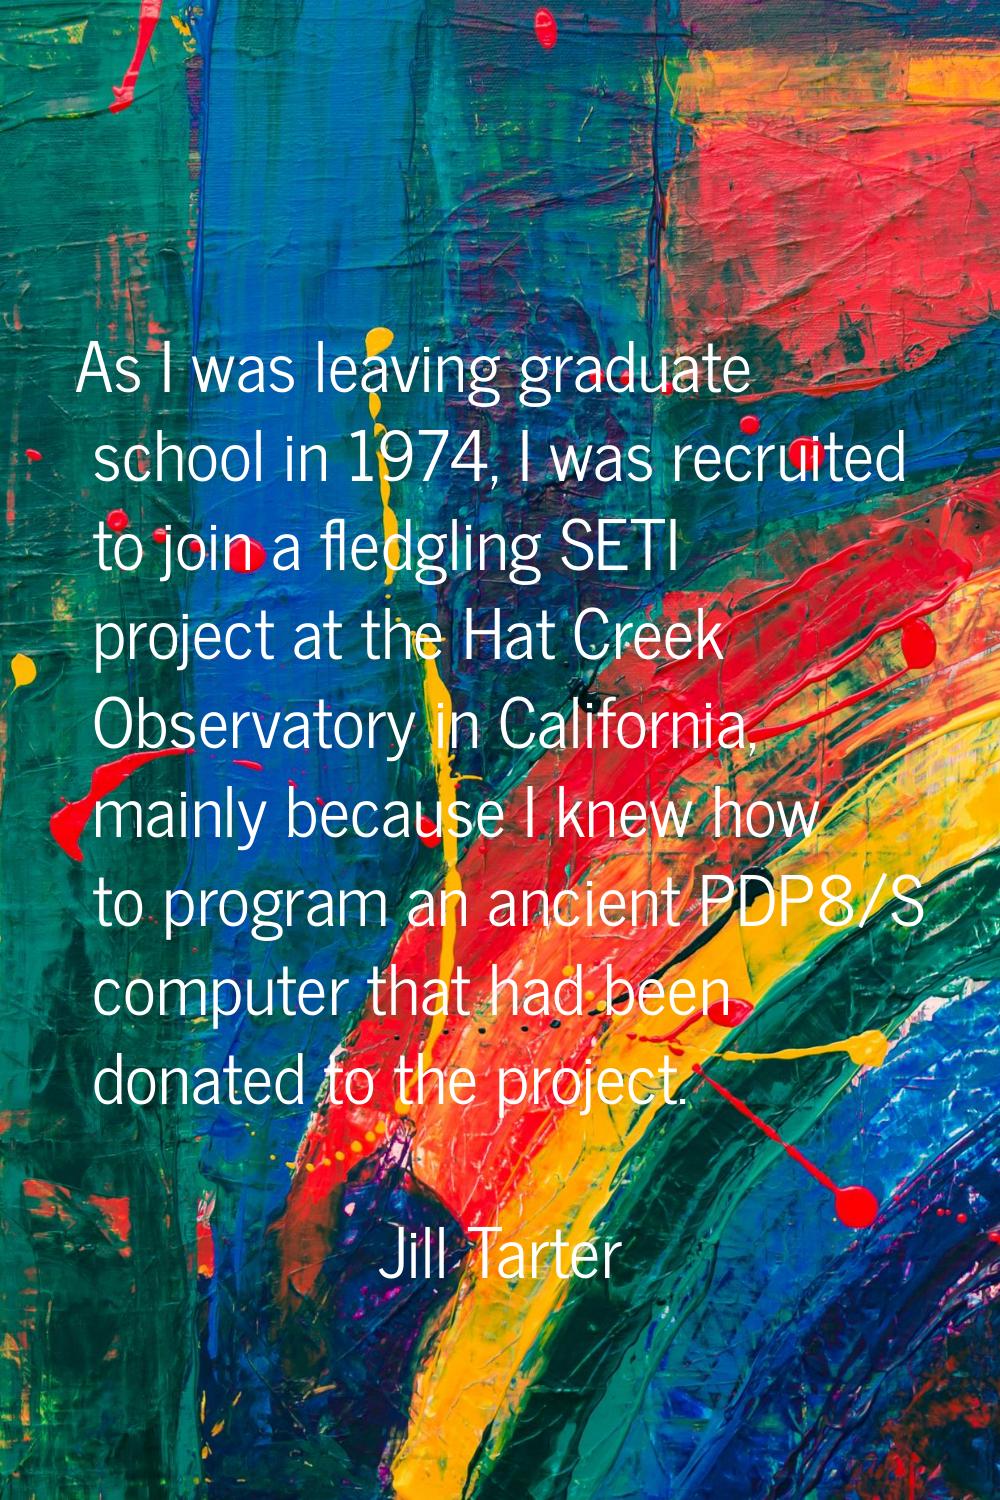 As I was leaving graduate school in 1974, I was recruited to join a fledgling SETI project at the H